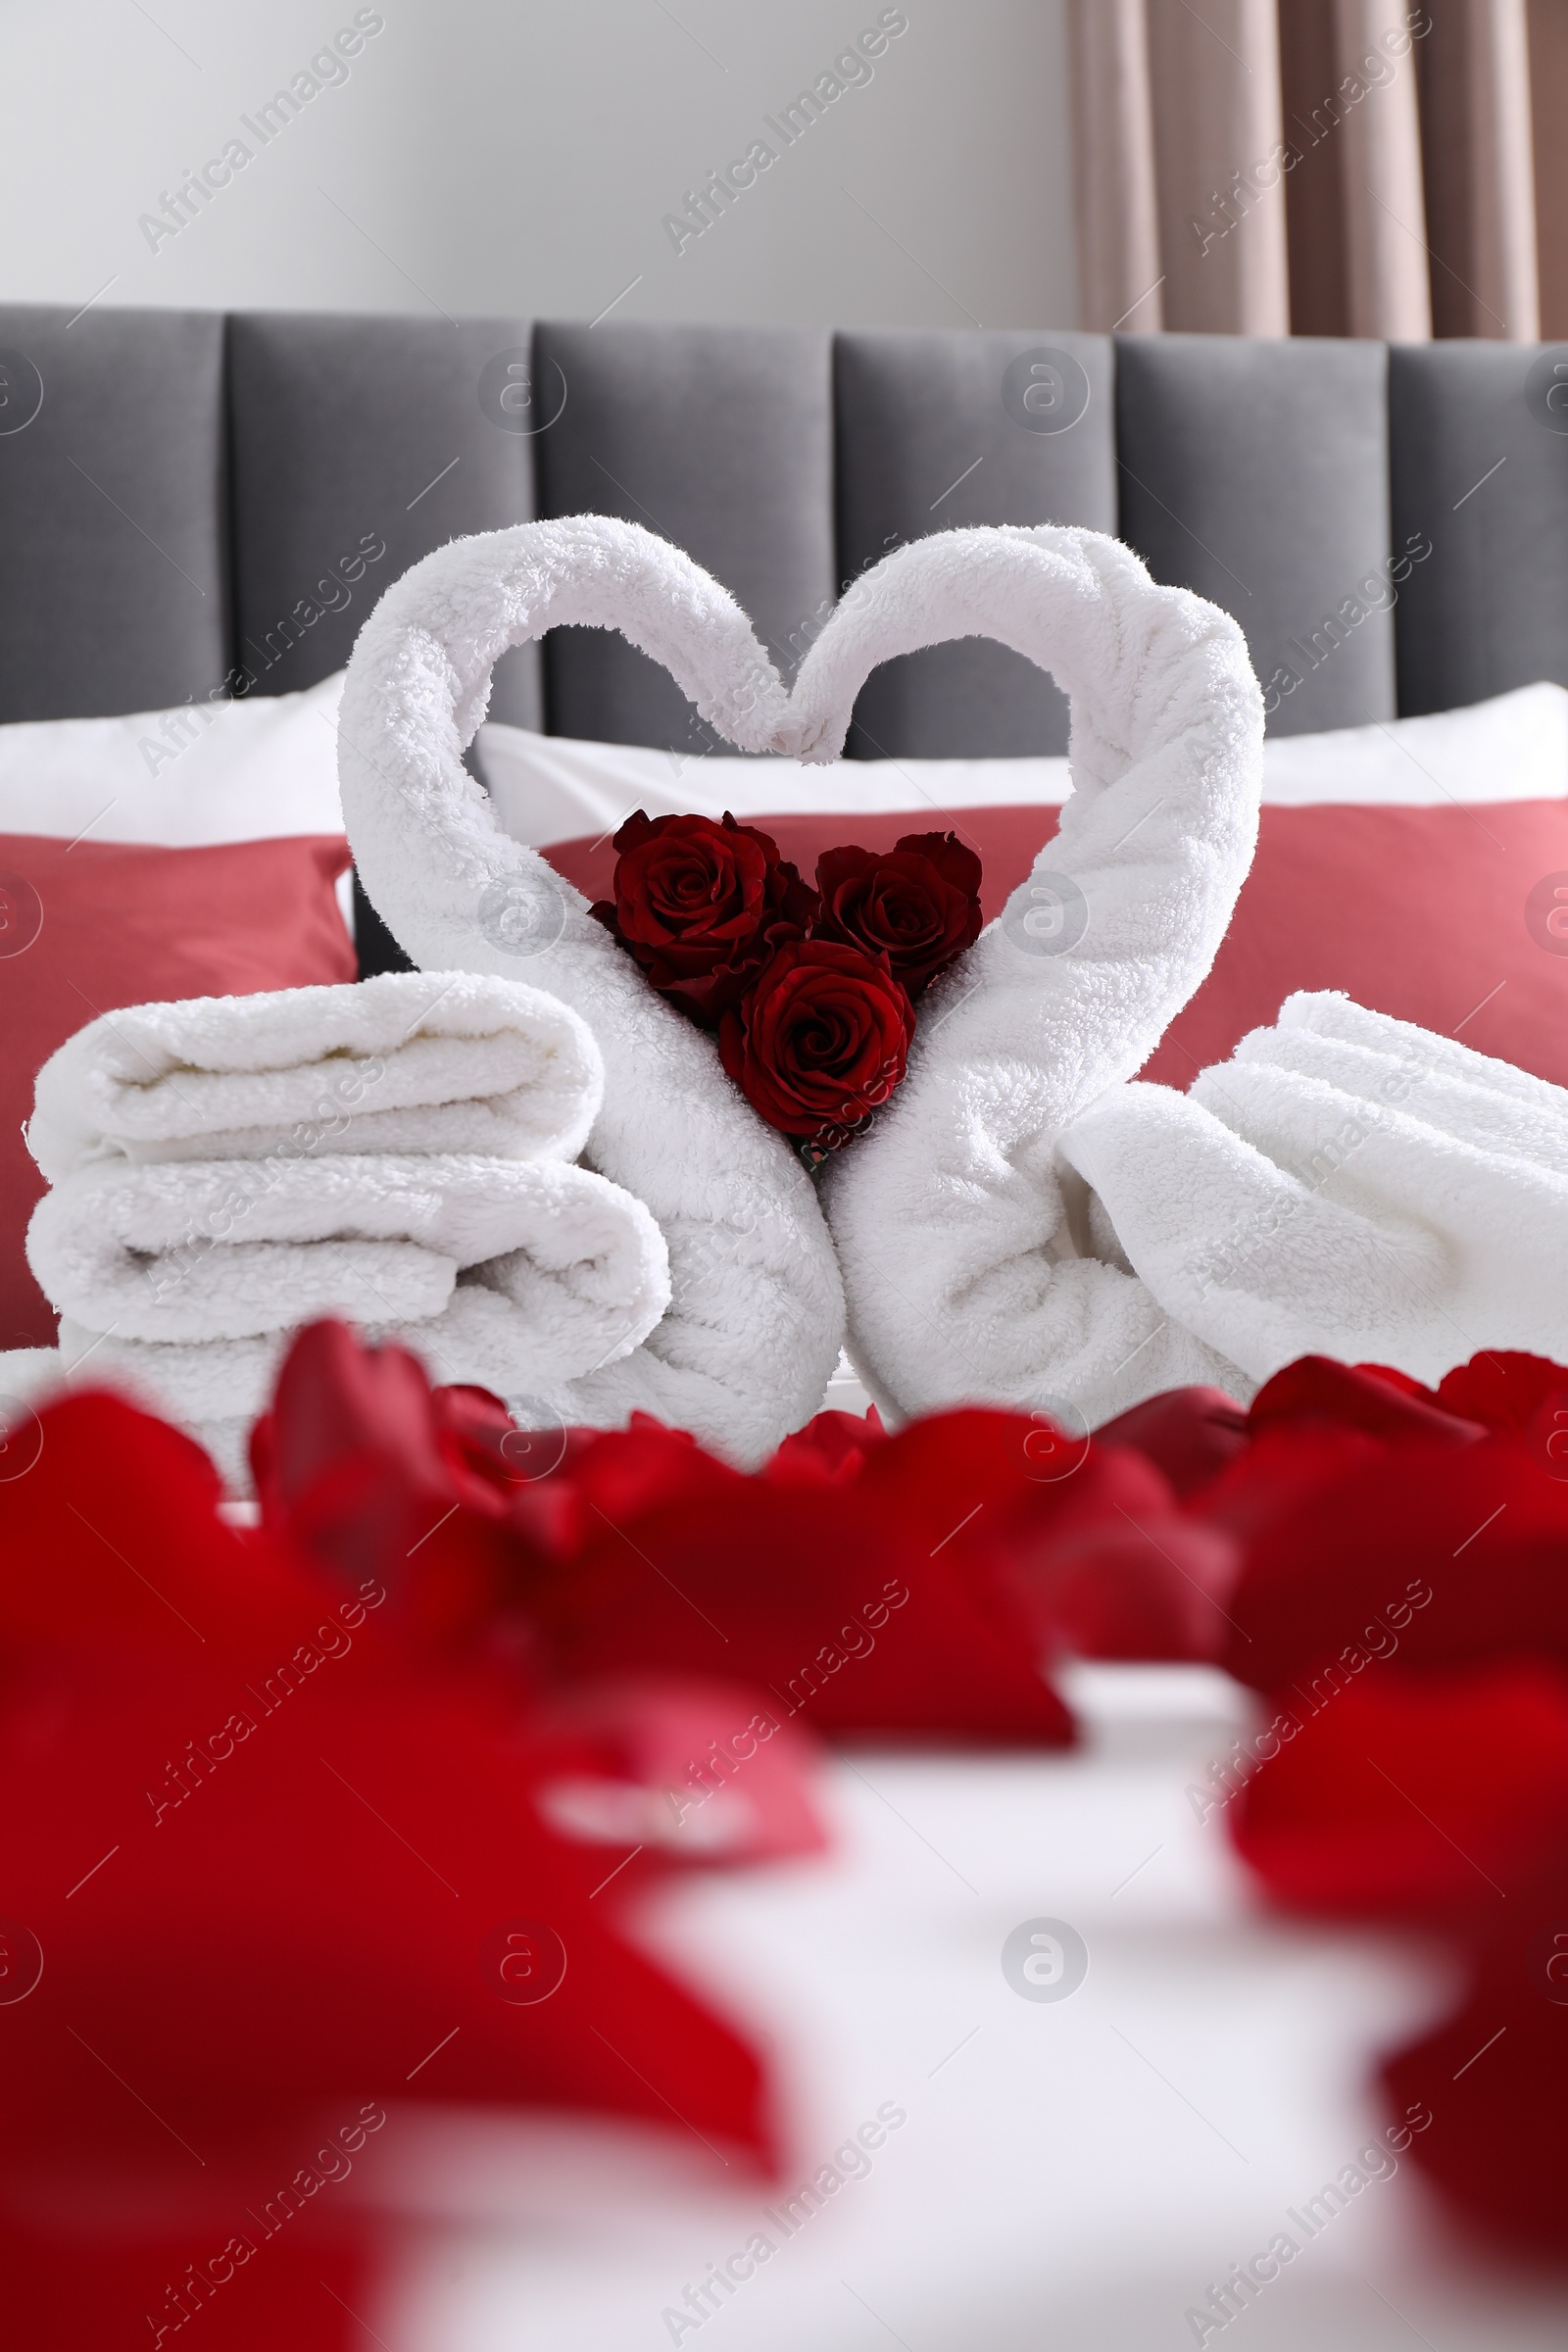 Photo of Honeymoon. Swans made with towels and beautiful rose petals on bed in room